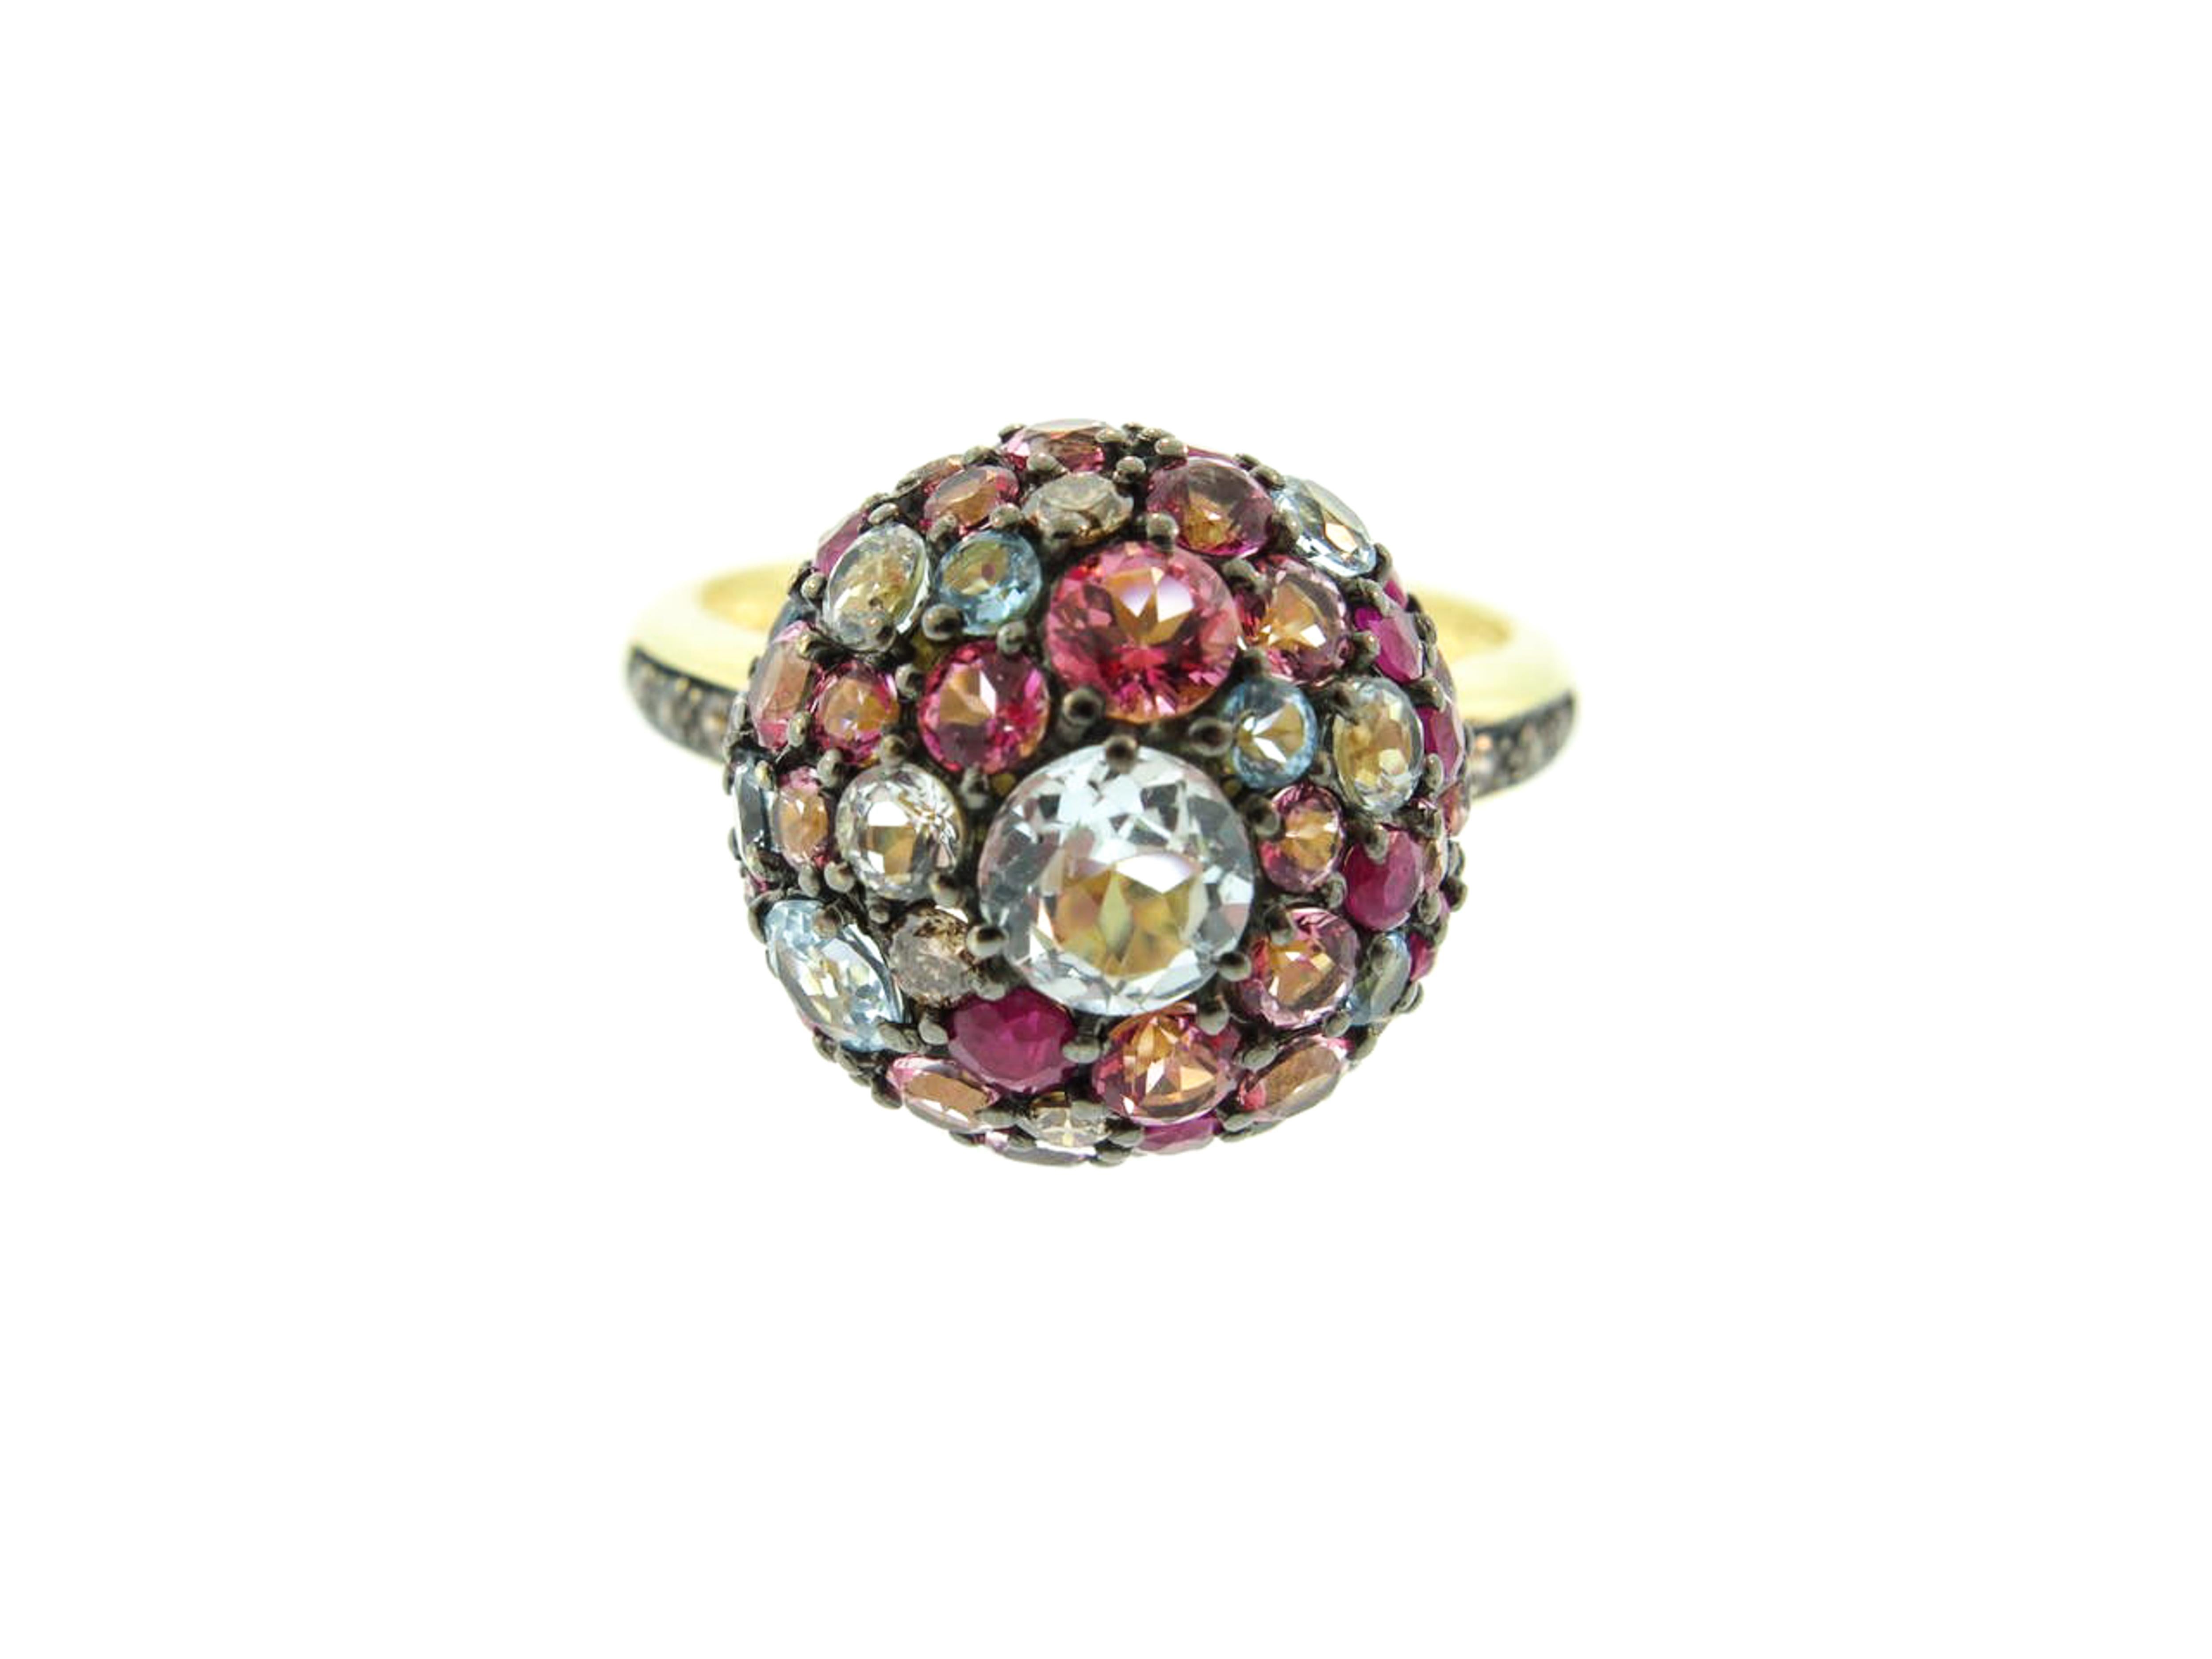 Ruby, blue sky topaz and pink sapphires makes this colorful domed ring more fun. 
Is handcrafted 18k yellow gold and finished with a black rhodium to intensify colors and create a contrast.
Crafted to fit a finger size 6.5 but can be sized